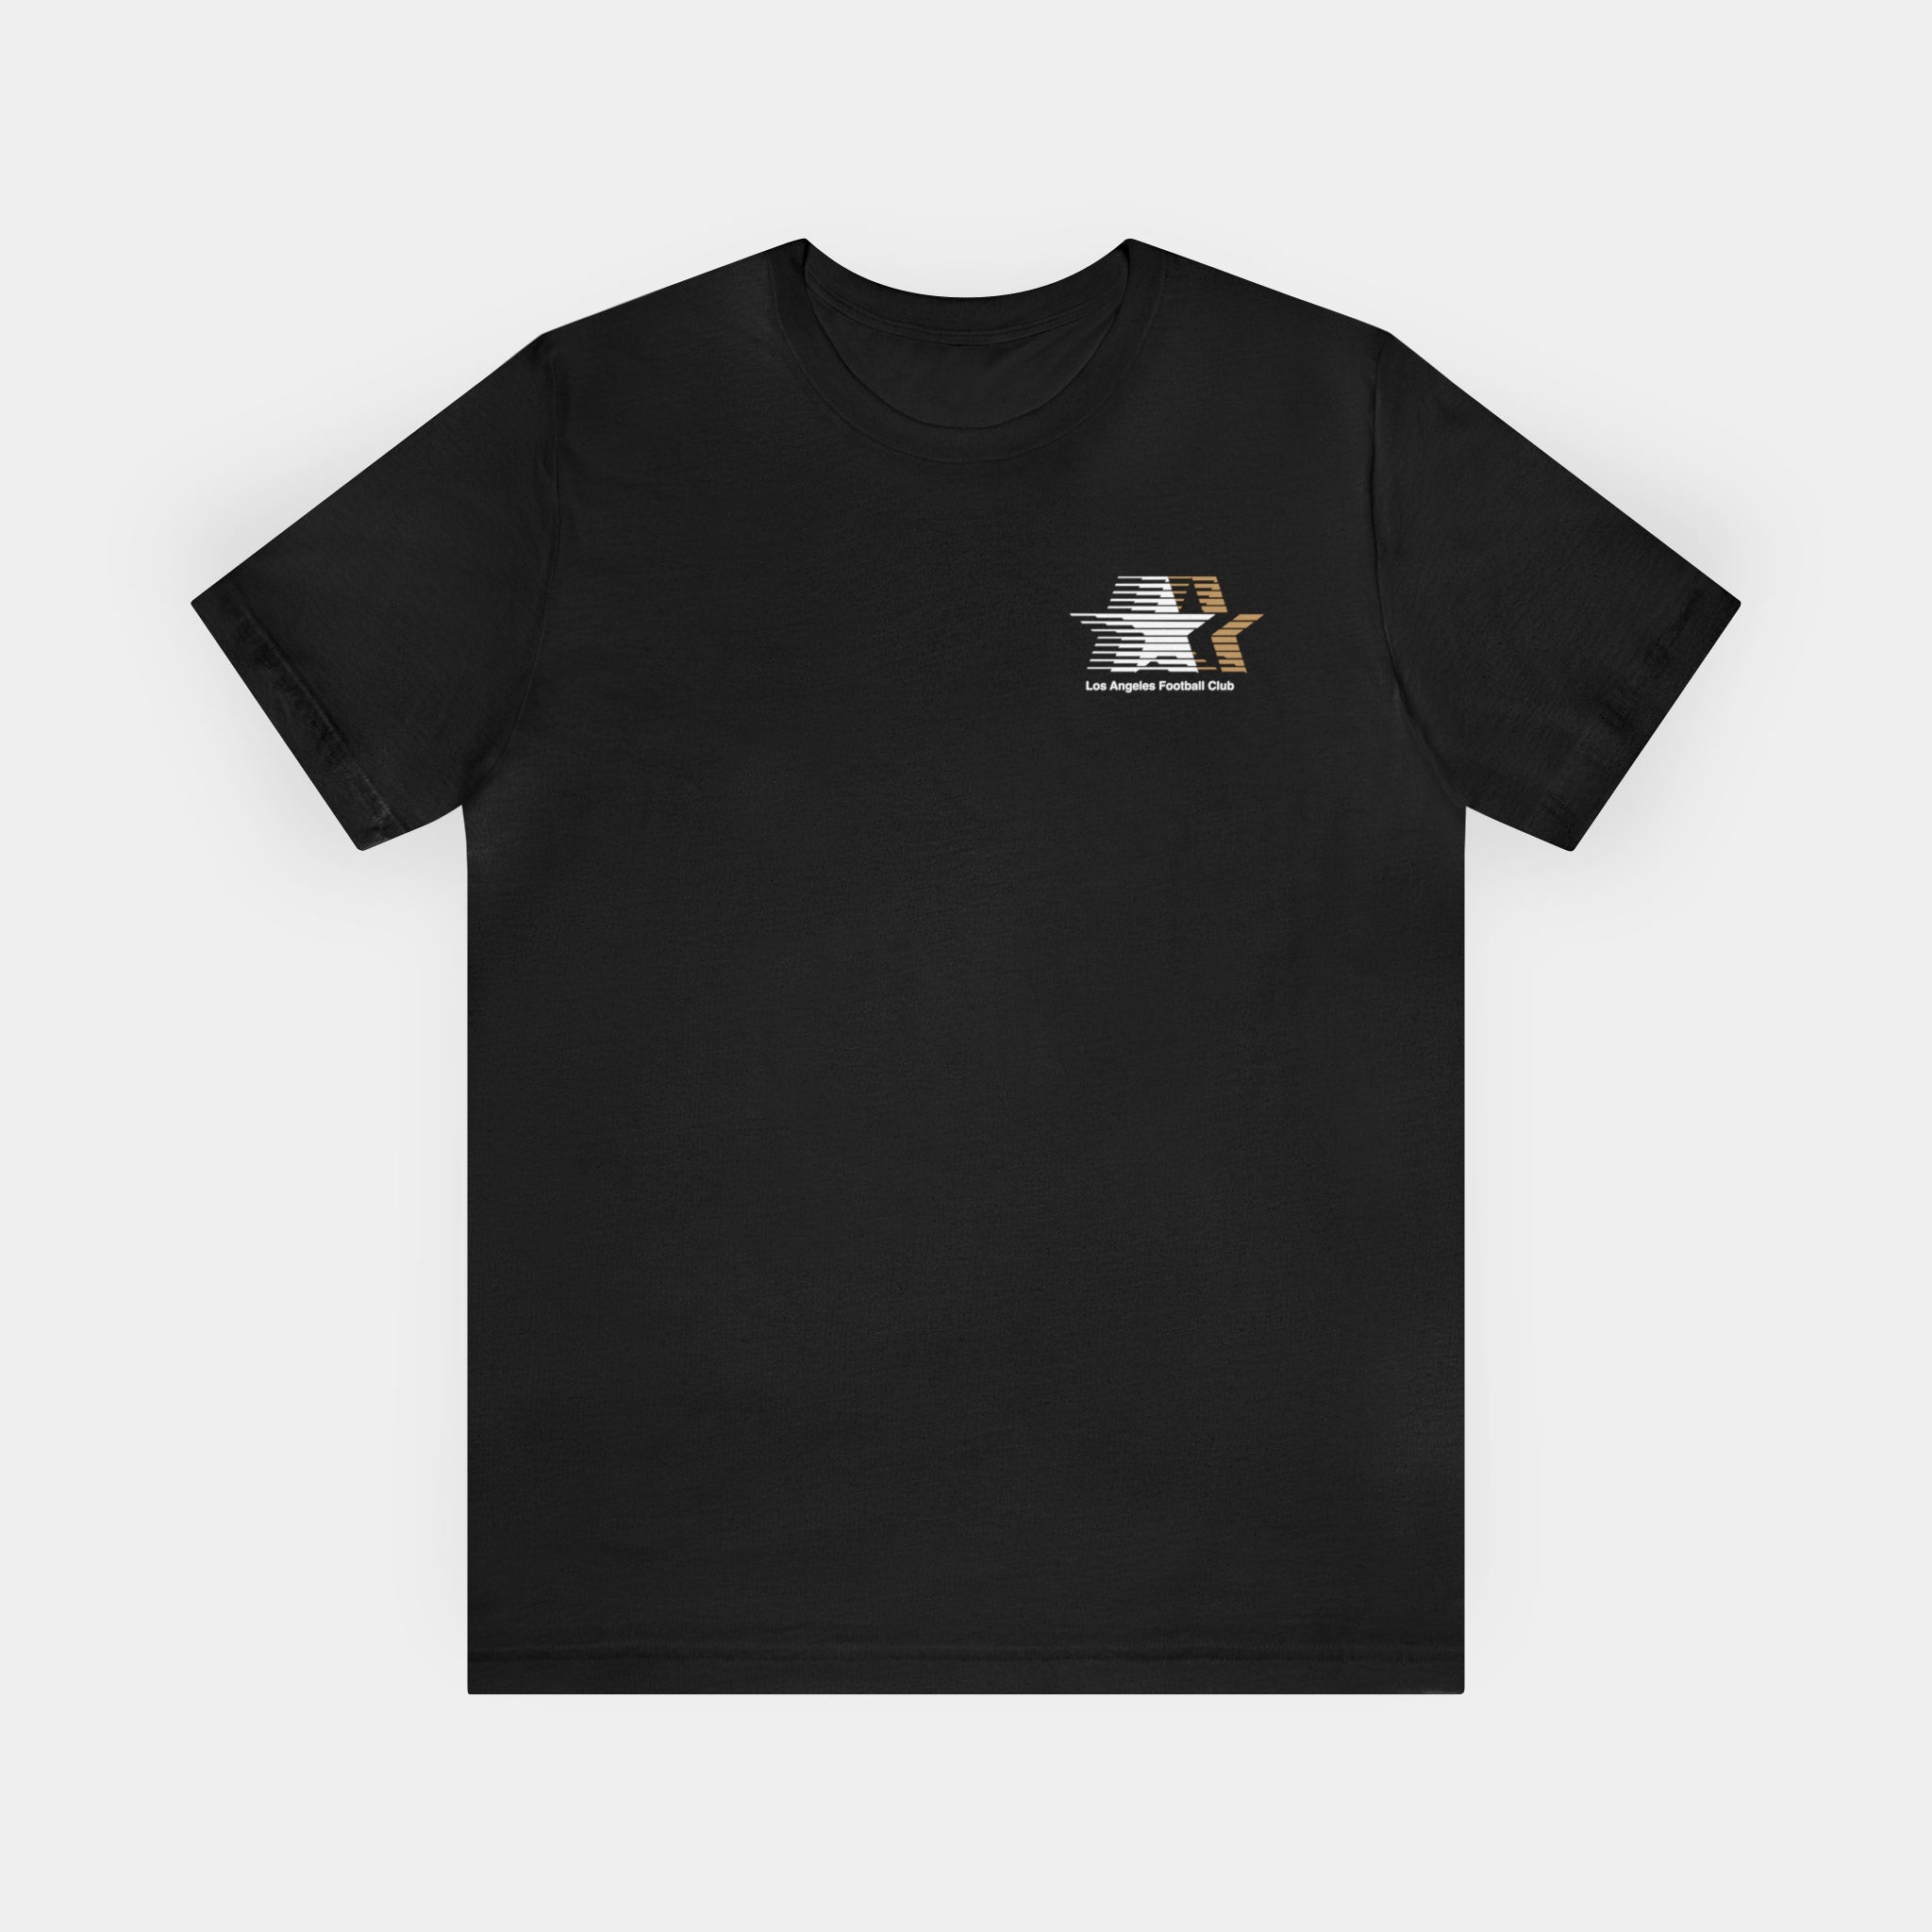 Olympic Ave (LAFC) T-shirt